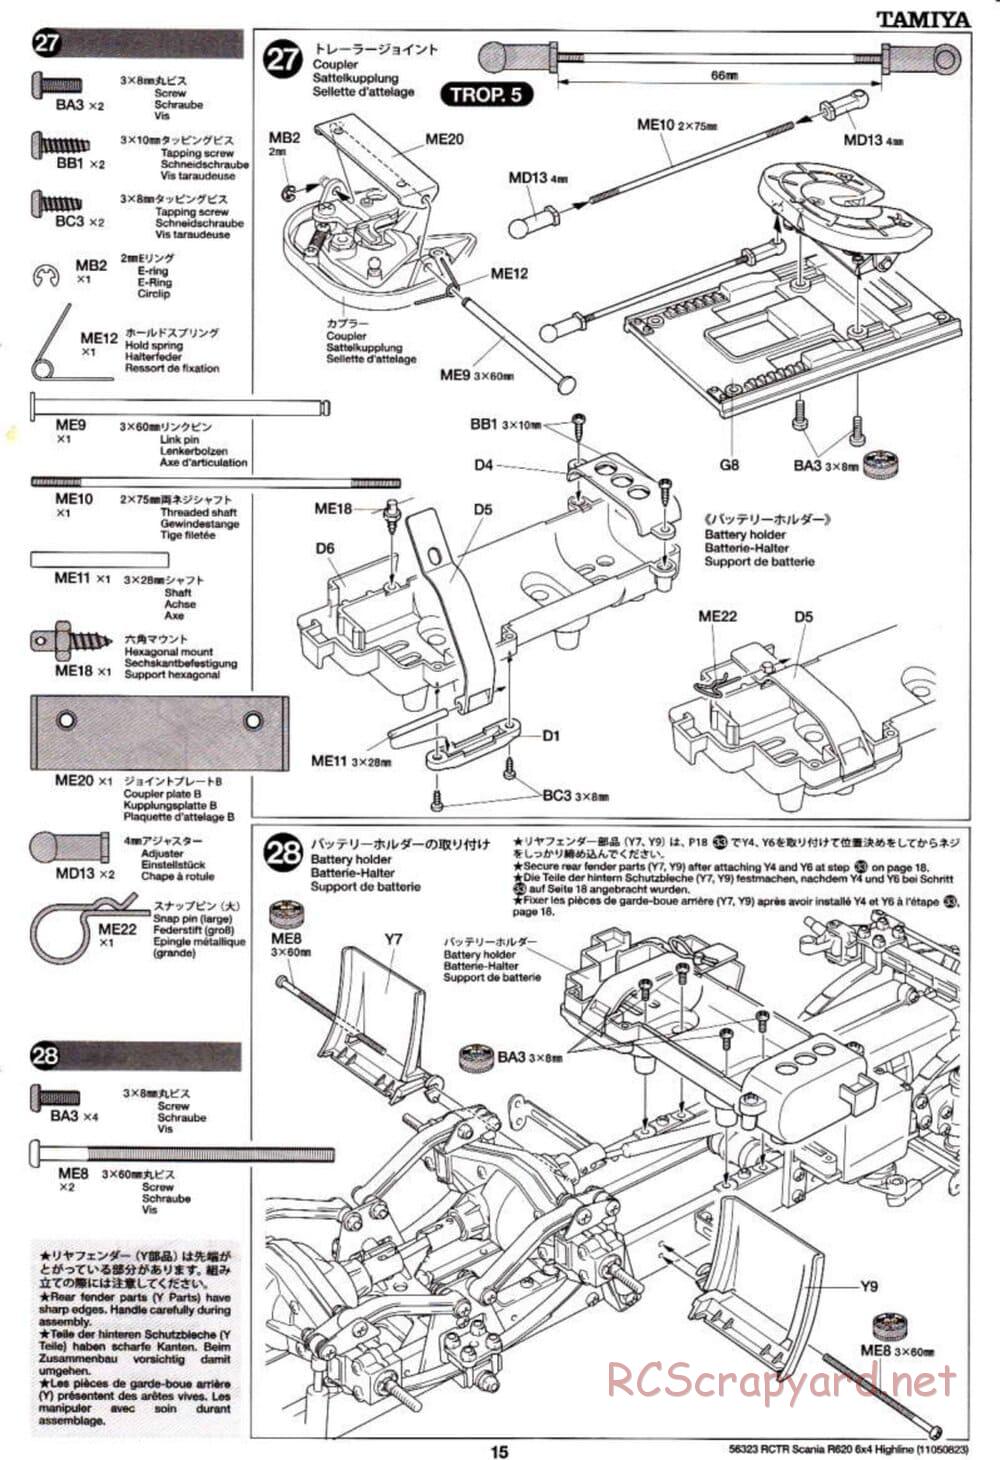 Tamiya - Scania R620 6x4 Highline Tractor Truck Chassis - Manual - Page 15